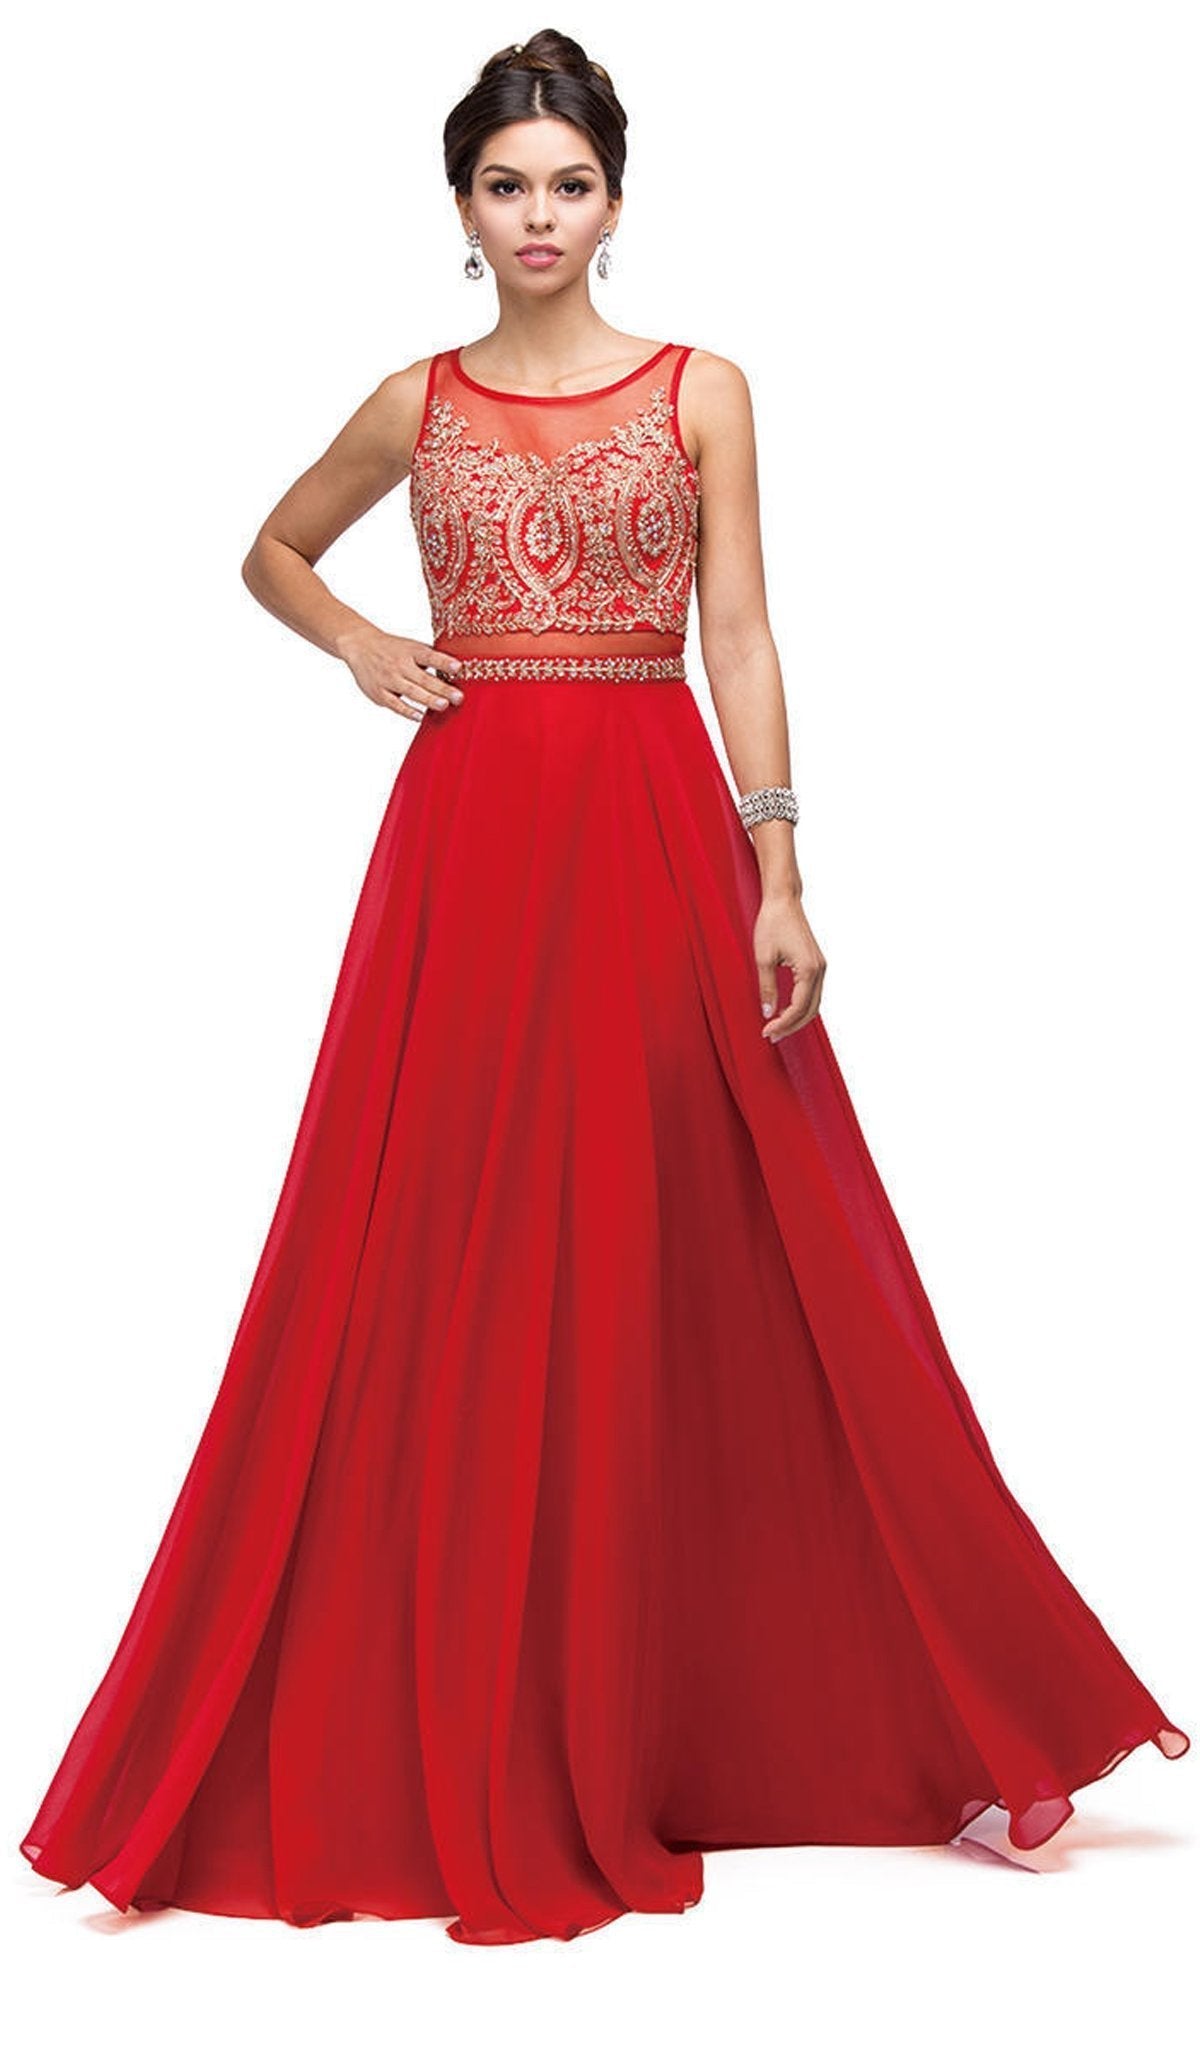 Dancing Queen - 9856 Illusion Bateau Gilded Evening Gown Special Occasion Dress